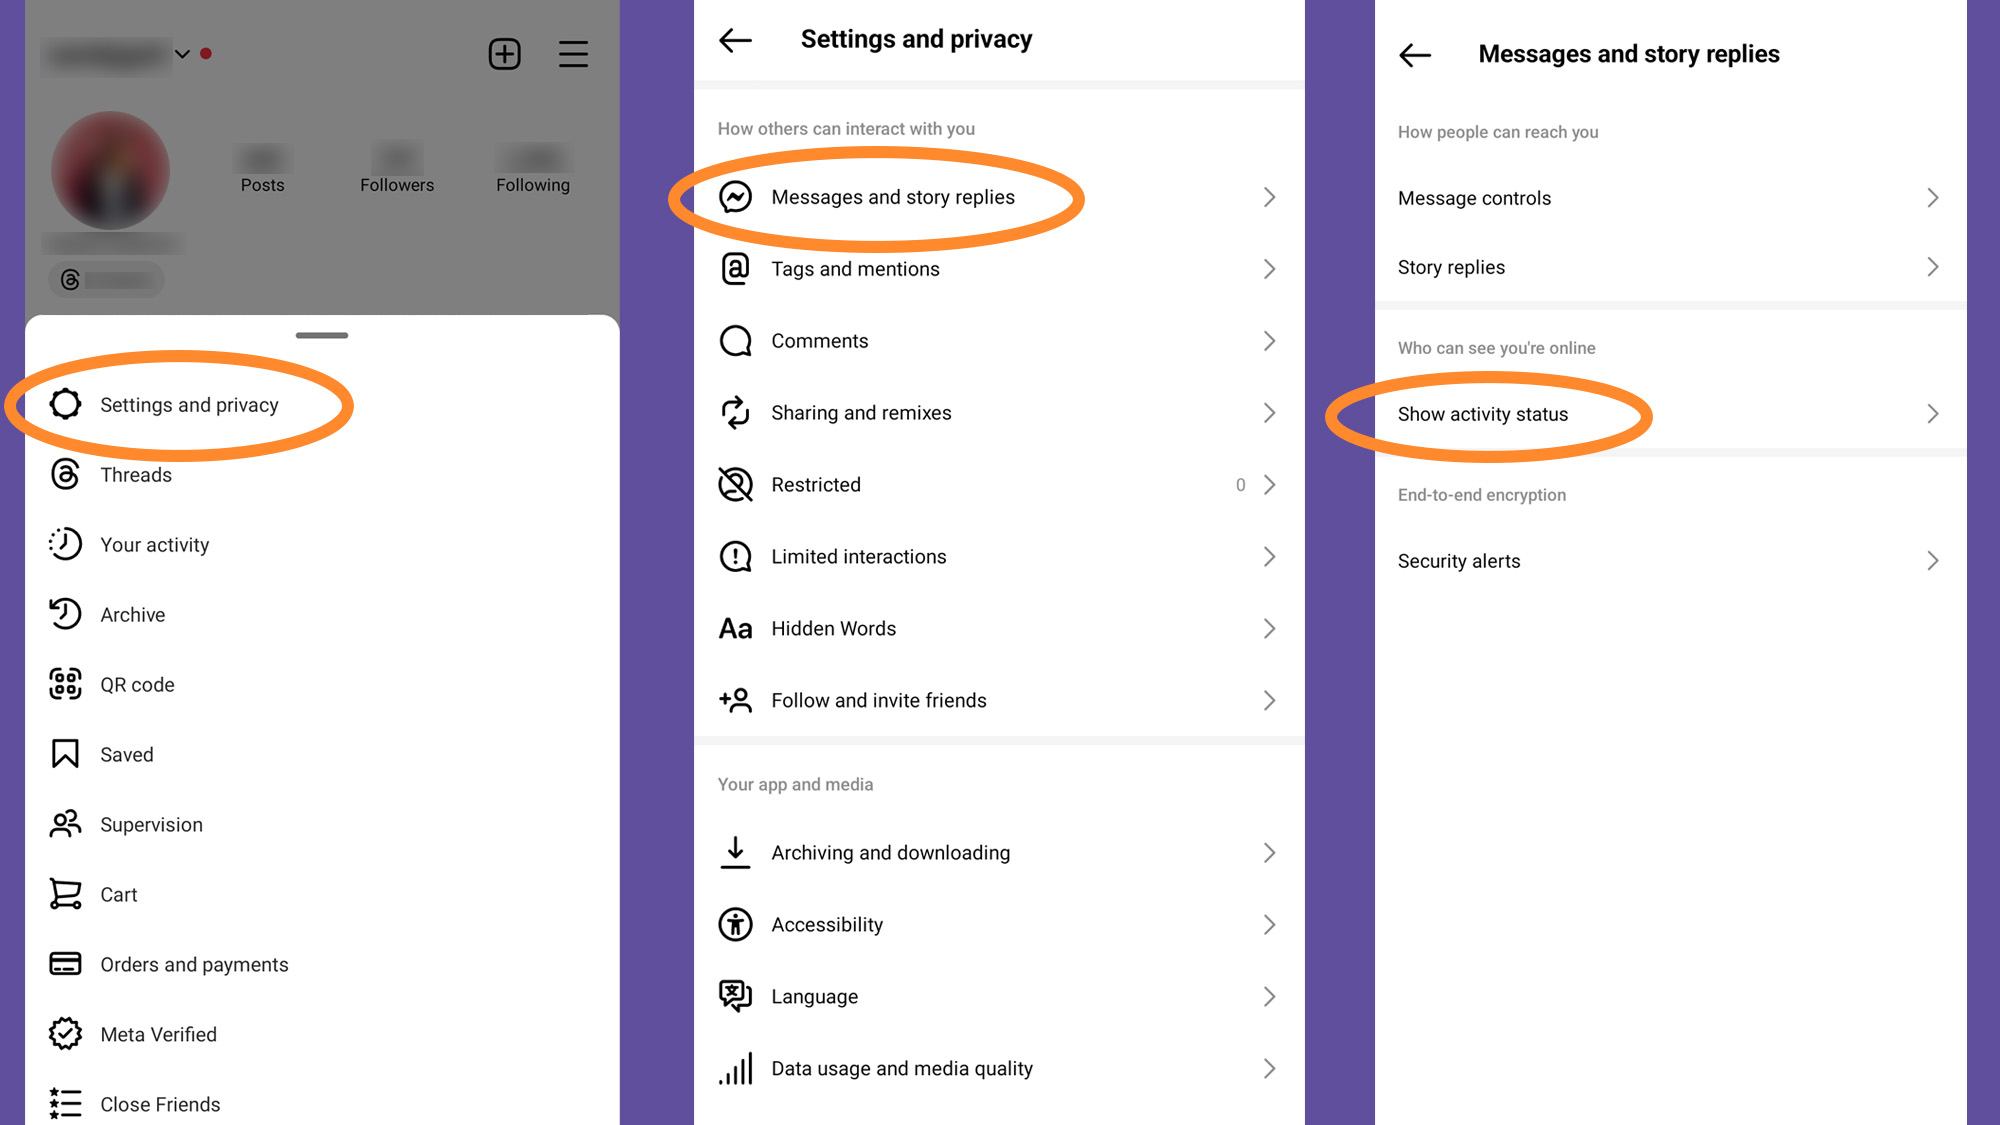 Instagram's privacy settings and activity status menu